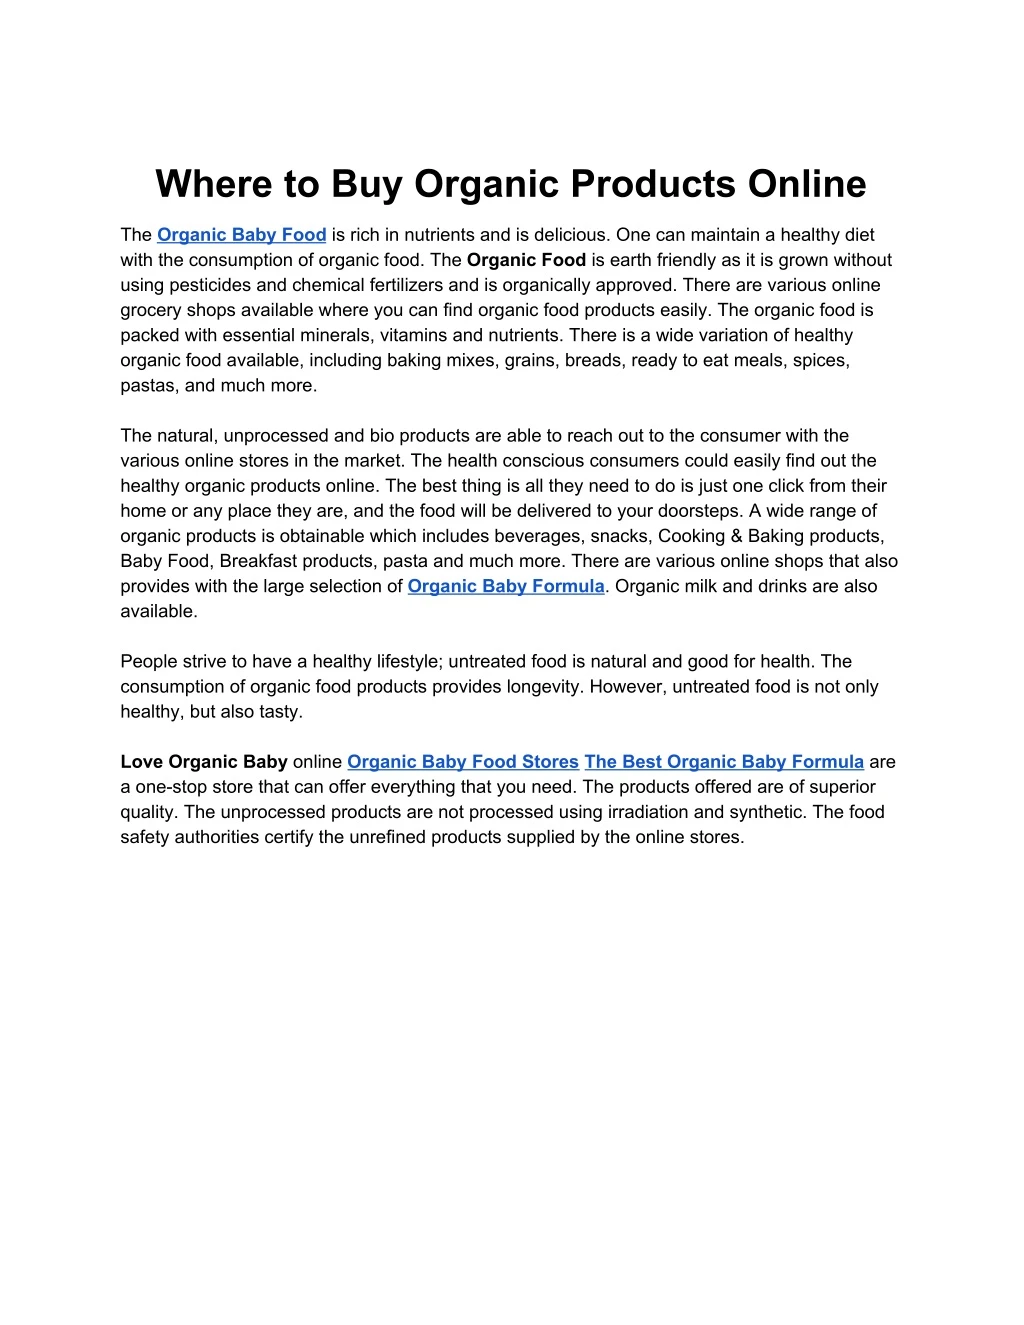 where to buy organic products online